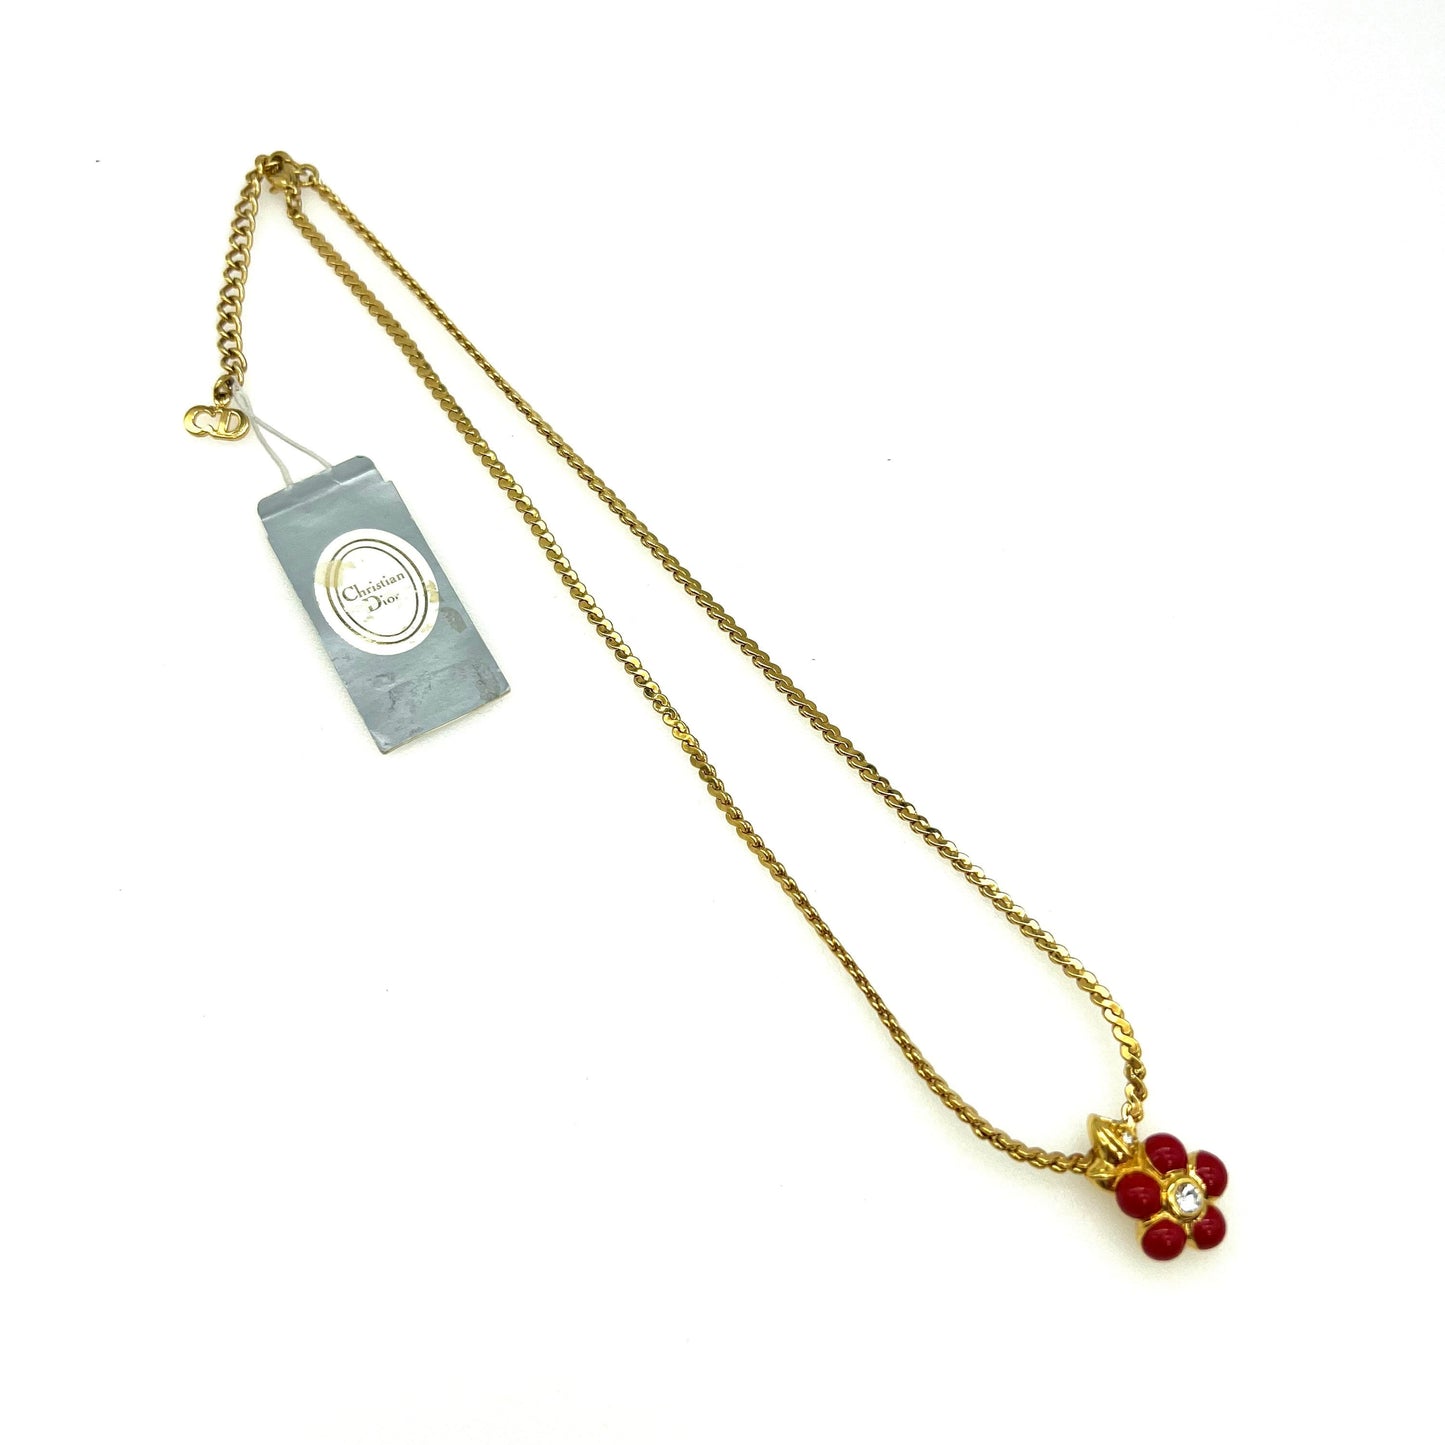 Christian Dior Gold Plated Red Enamel and Swarovski Crystal Flower Pendant Necklace